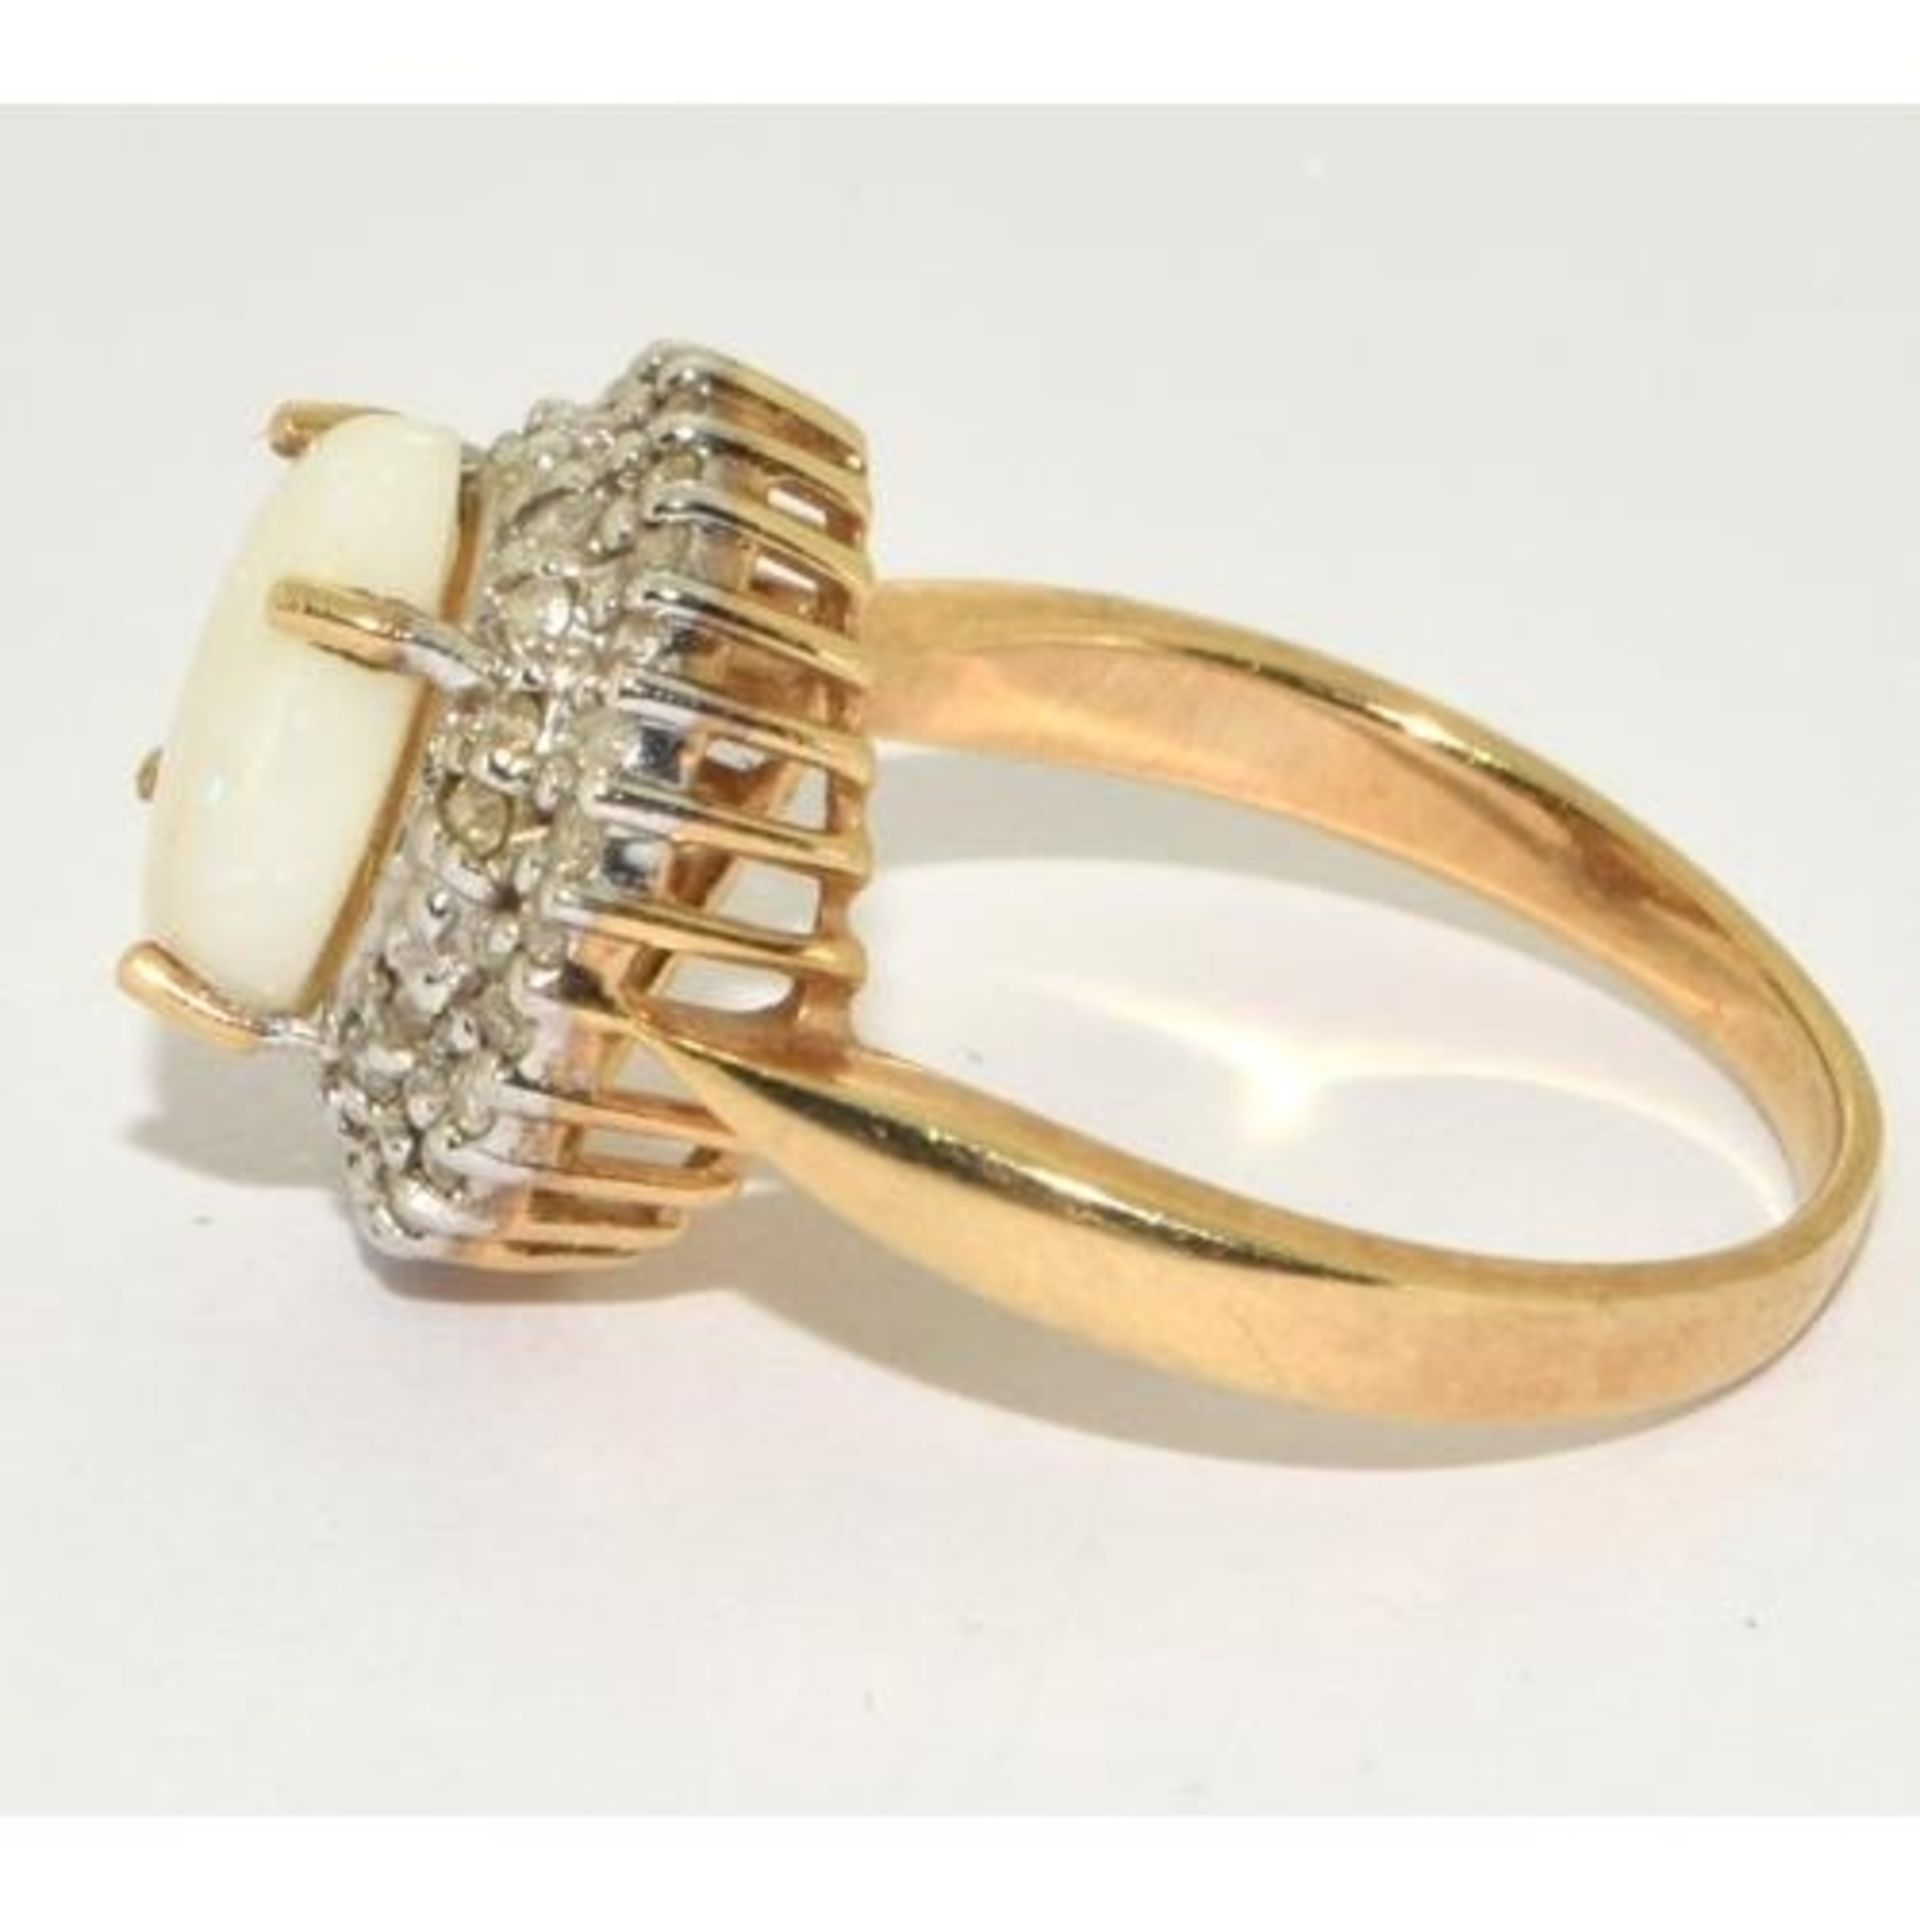 9ct gold ladies Diamond and Opal statement ring in a halo design setting approx size N - Image 2 of 5